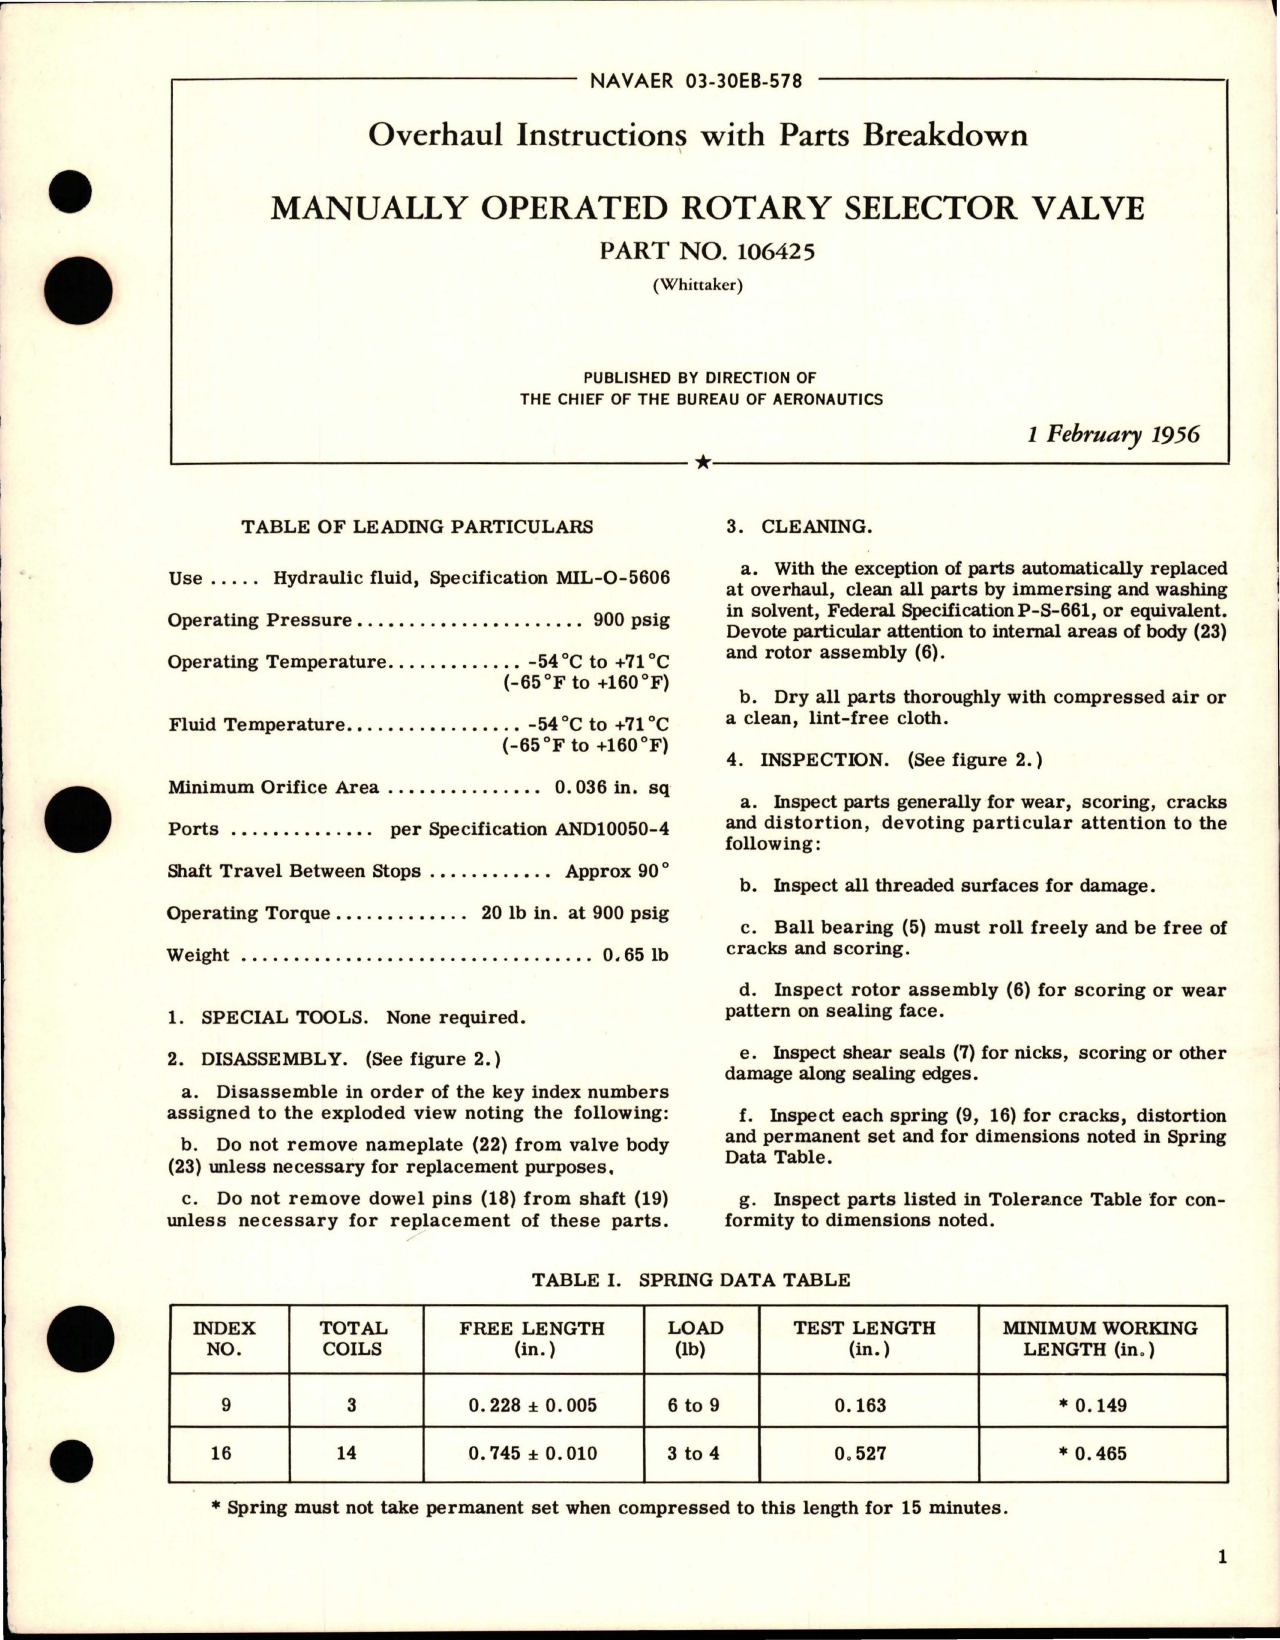 Sample page 1 from AirCorps Library document: Overhaul Instructions with Parts Breakdown for Manually Operated Rotary Selector Valve - Part 106425